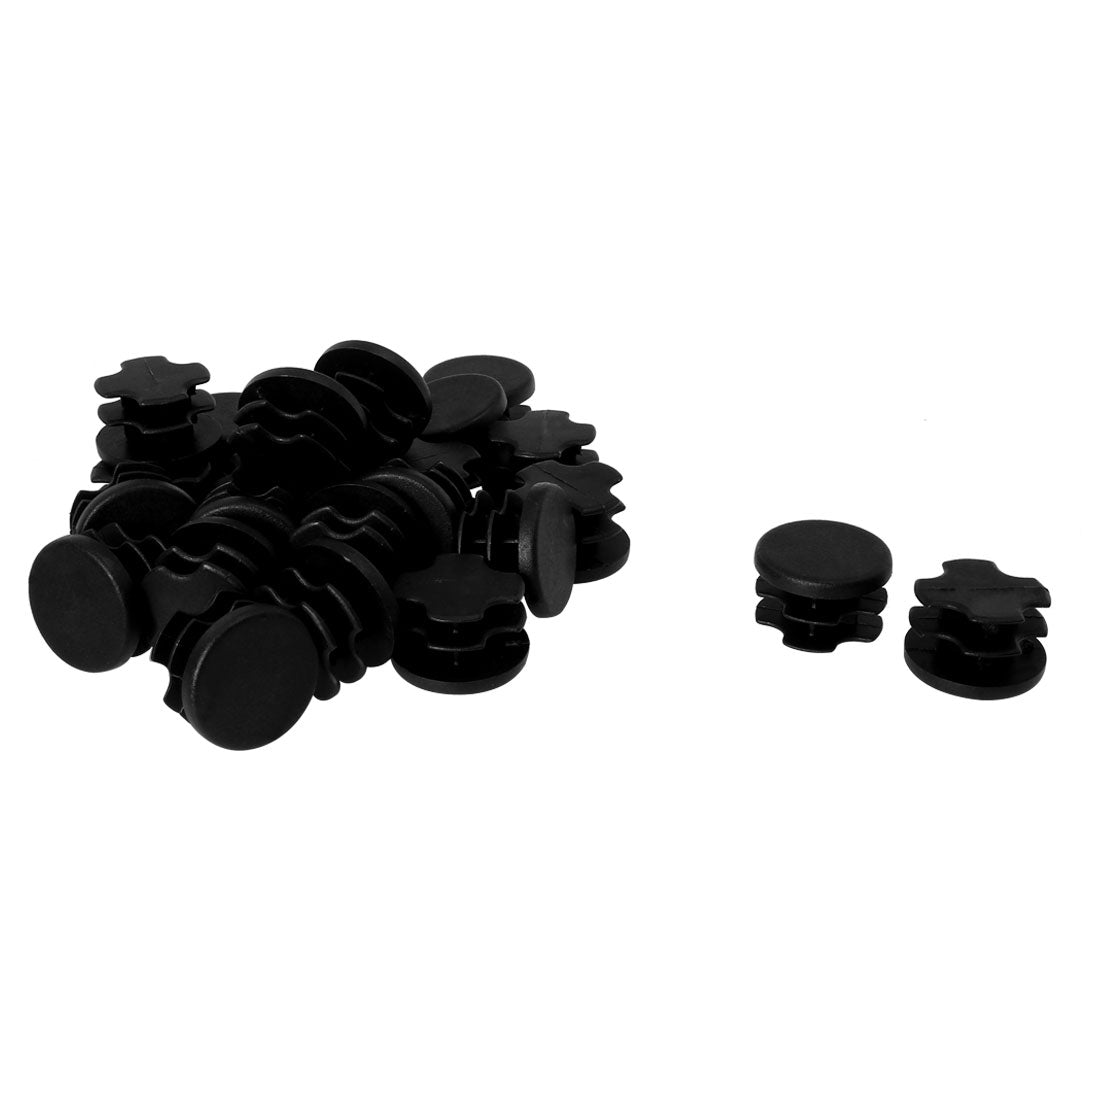 Uxcell Uxcell 19mm 0.75" OD Plastic Tube Inserts Pipe End Covers 25pcs, 0.63"-0.71" Inner Dia, Anti-moisture Caps